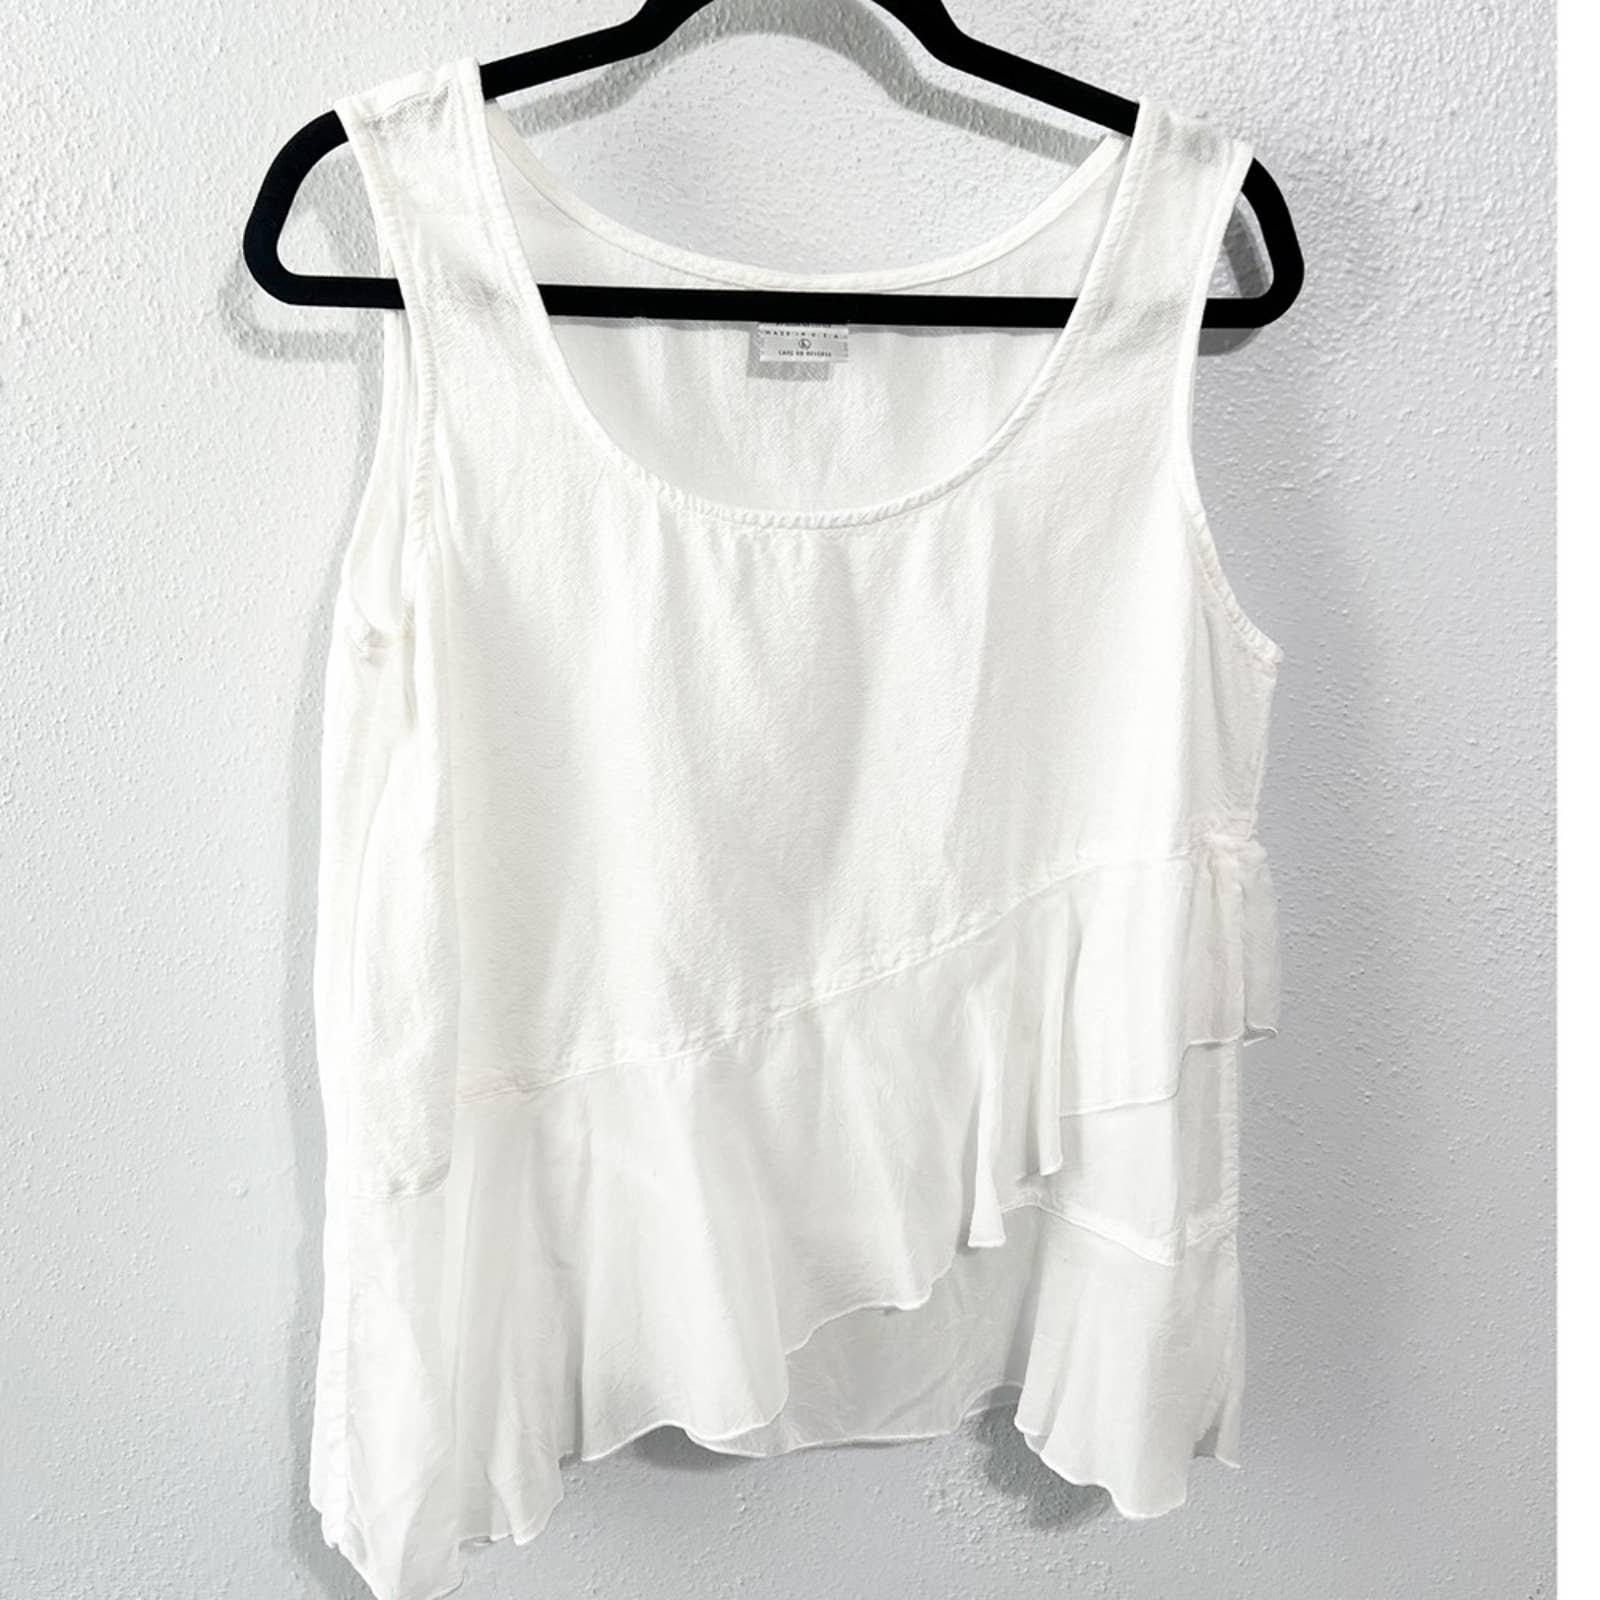 Discounted Color Me Cotton white ruffle tank size large